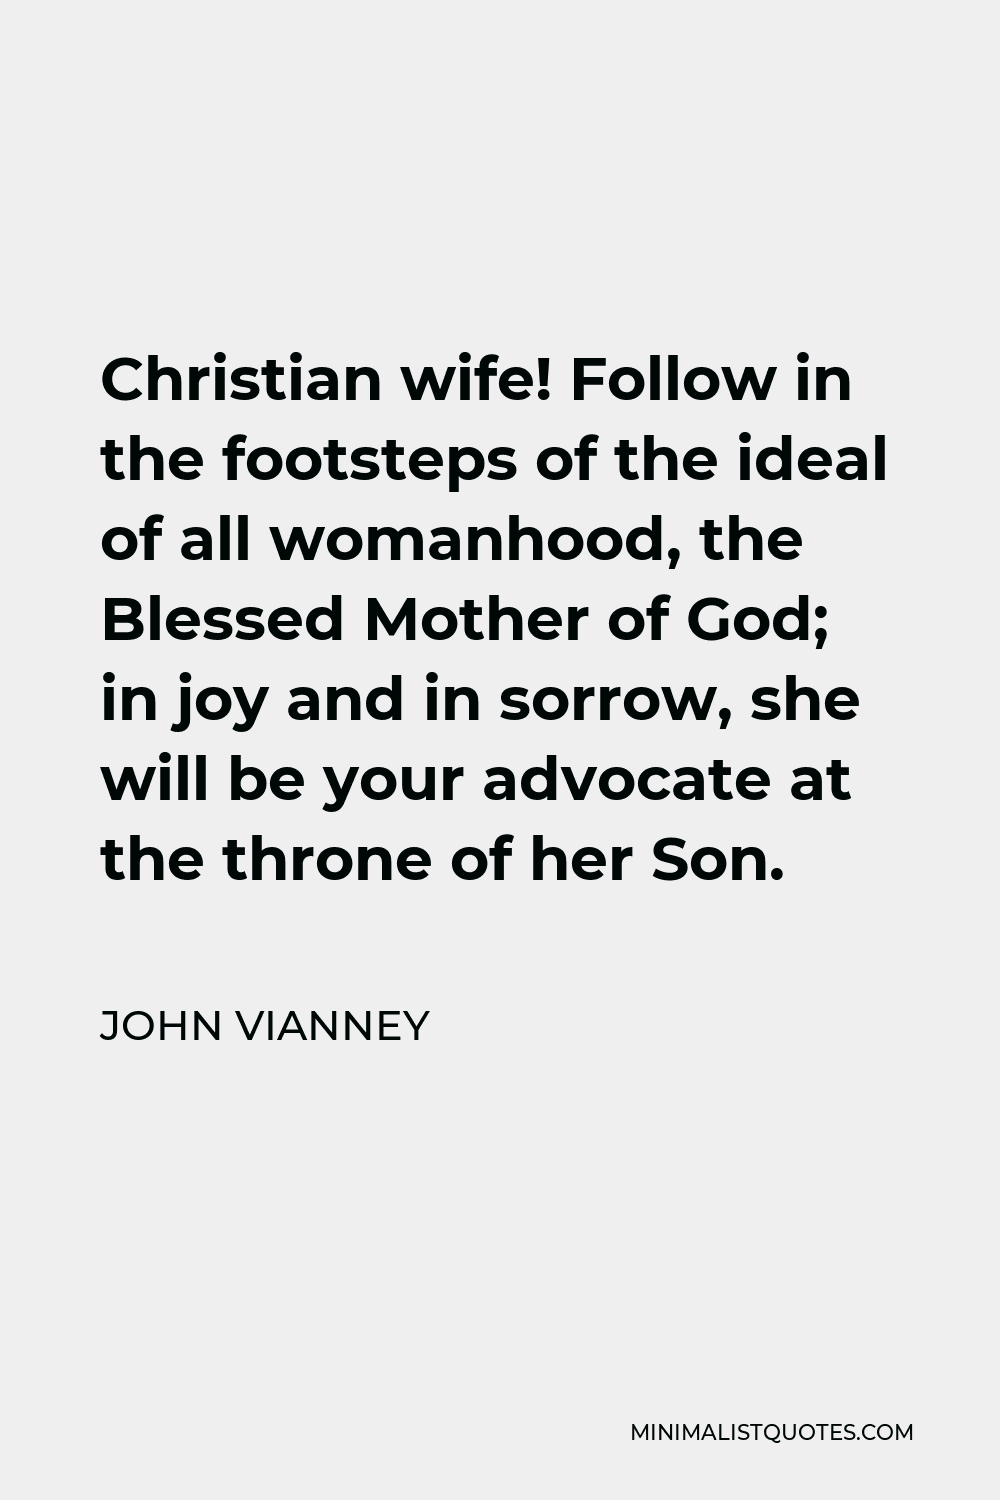 John Vianney Quote - Christian wife! Follow in the footsteps of the ideal of all womanhood, the Blessed Mother of God; in joy and in sorrow, she will be your advocate at the throne of her Son.